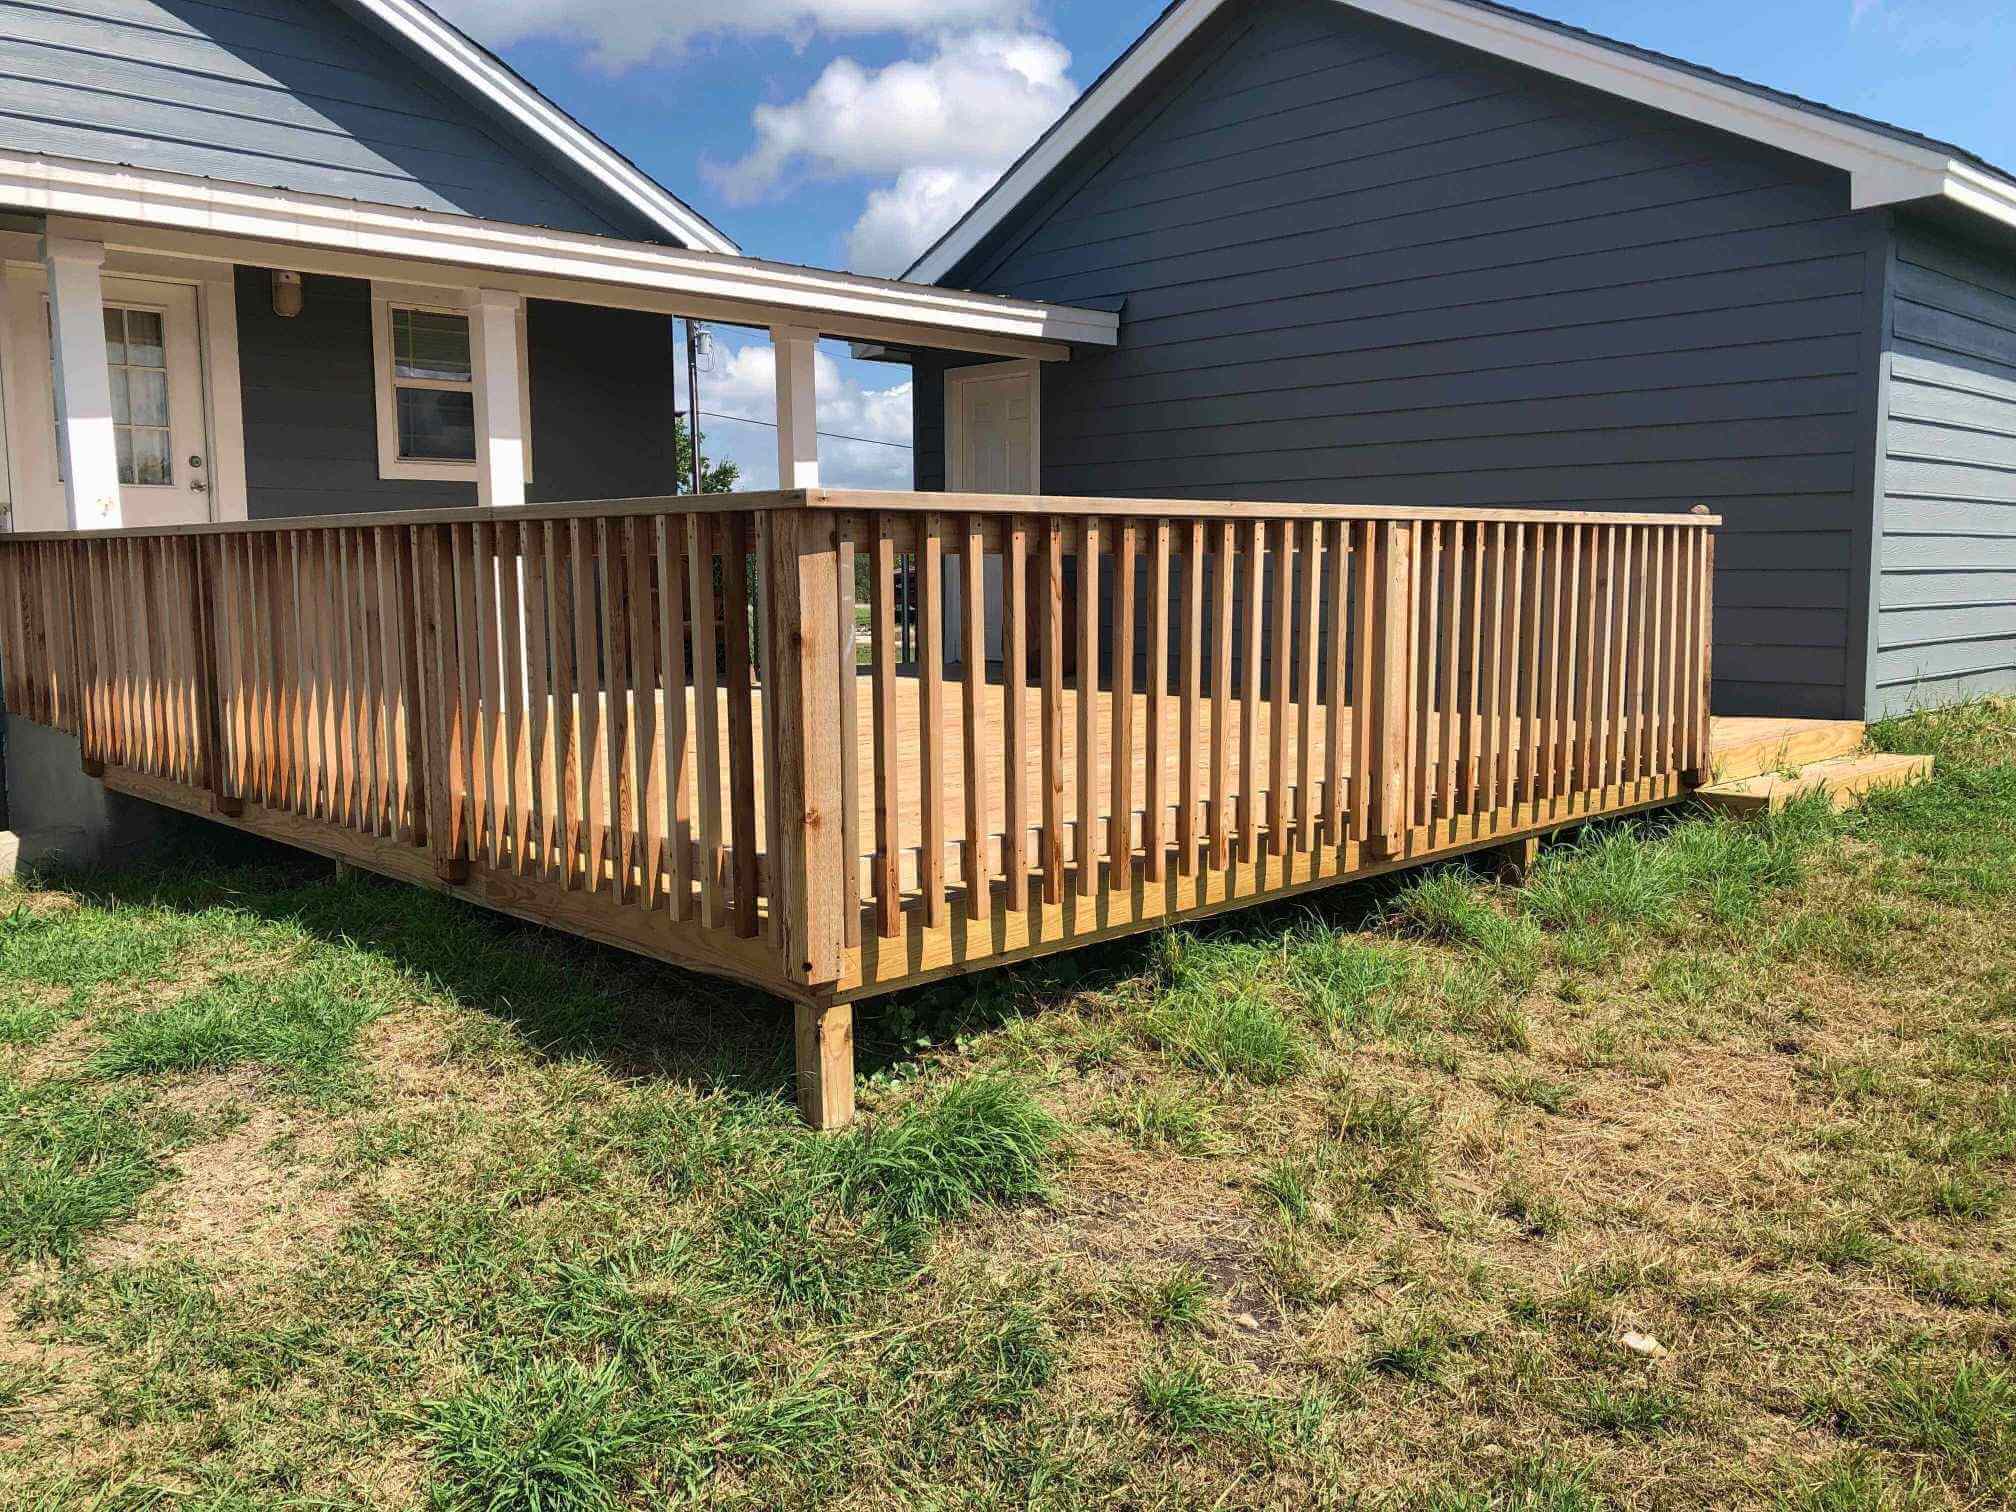 Low profile cedar deck with 2x2 used for railing